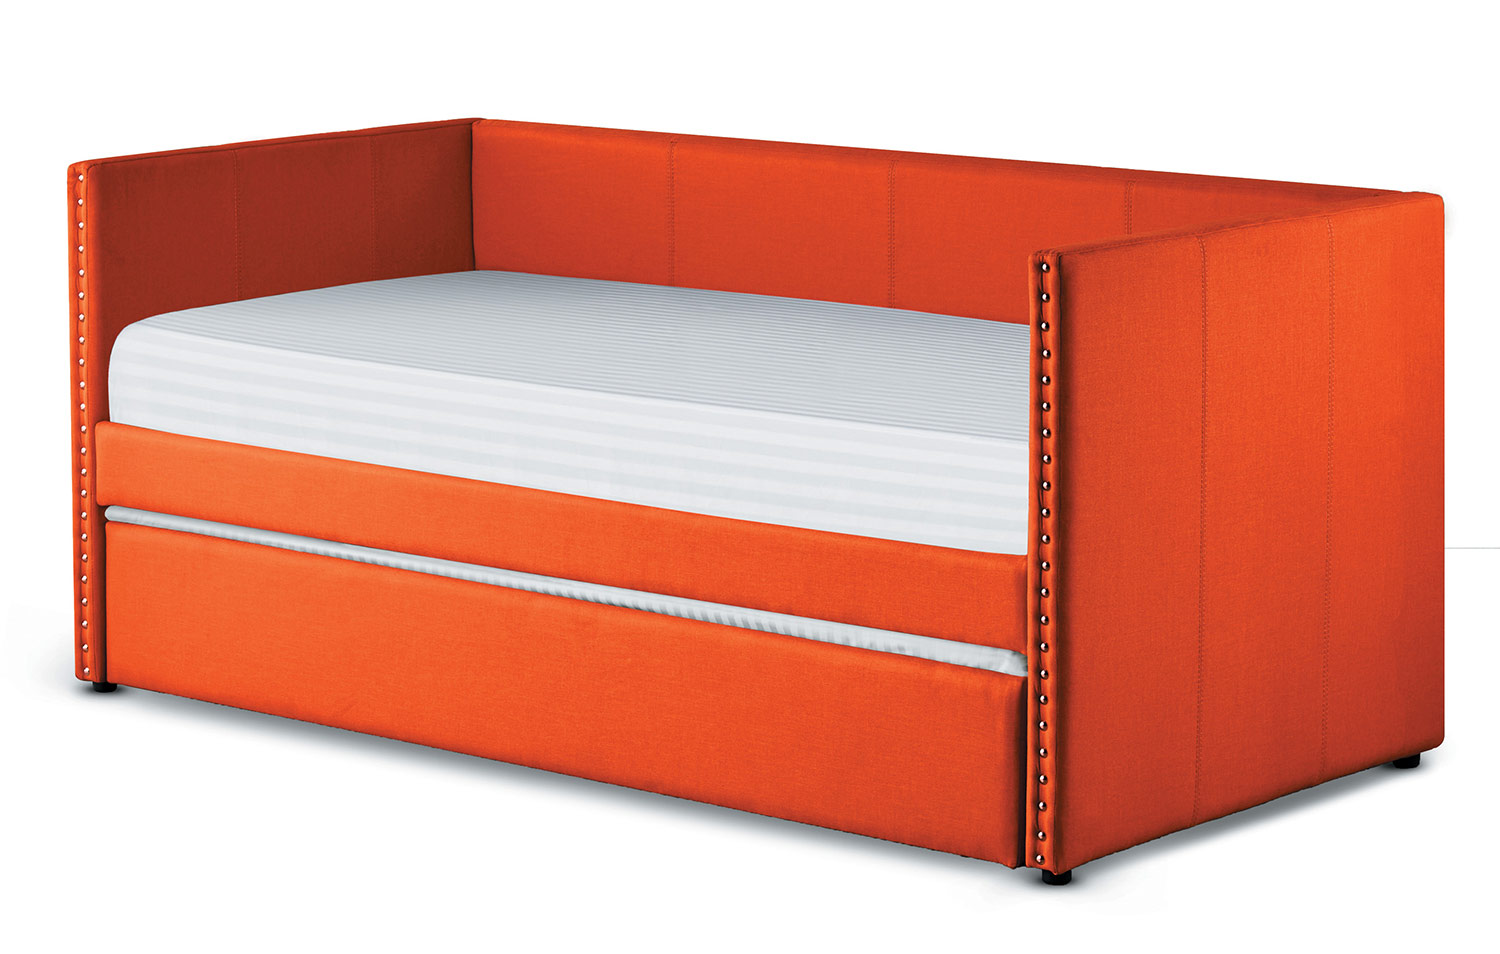 Homelegance Therese Daybed with Trundle - Orange